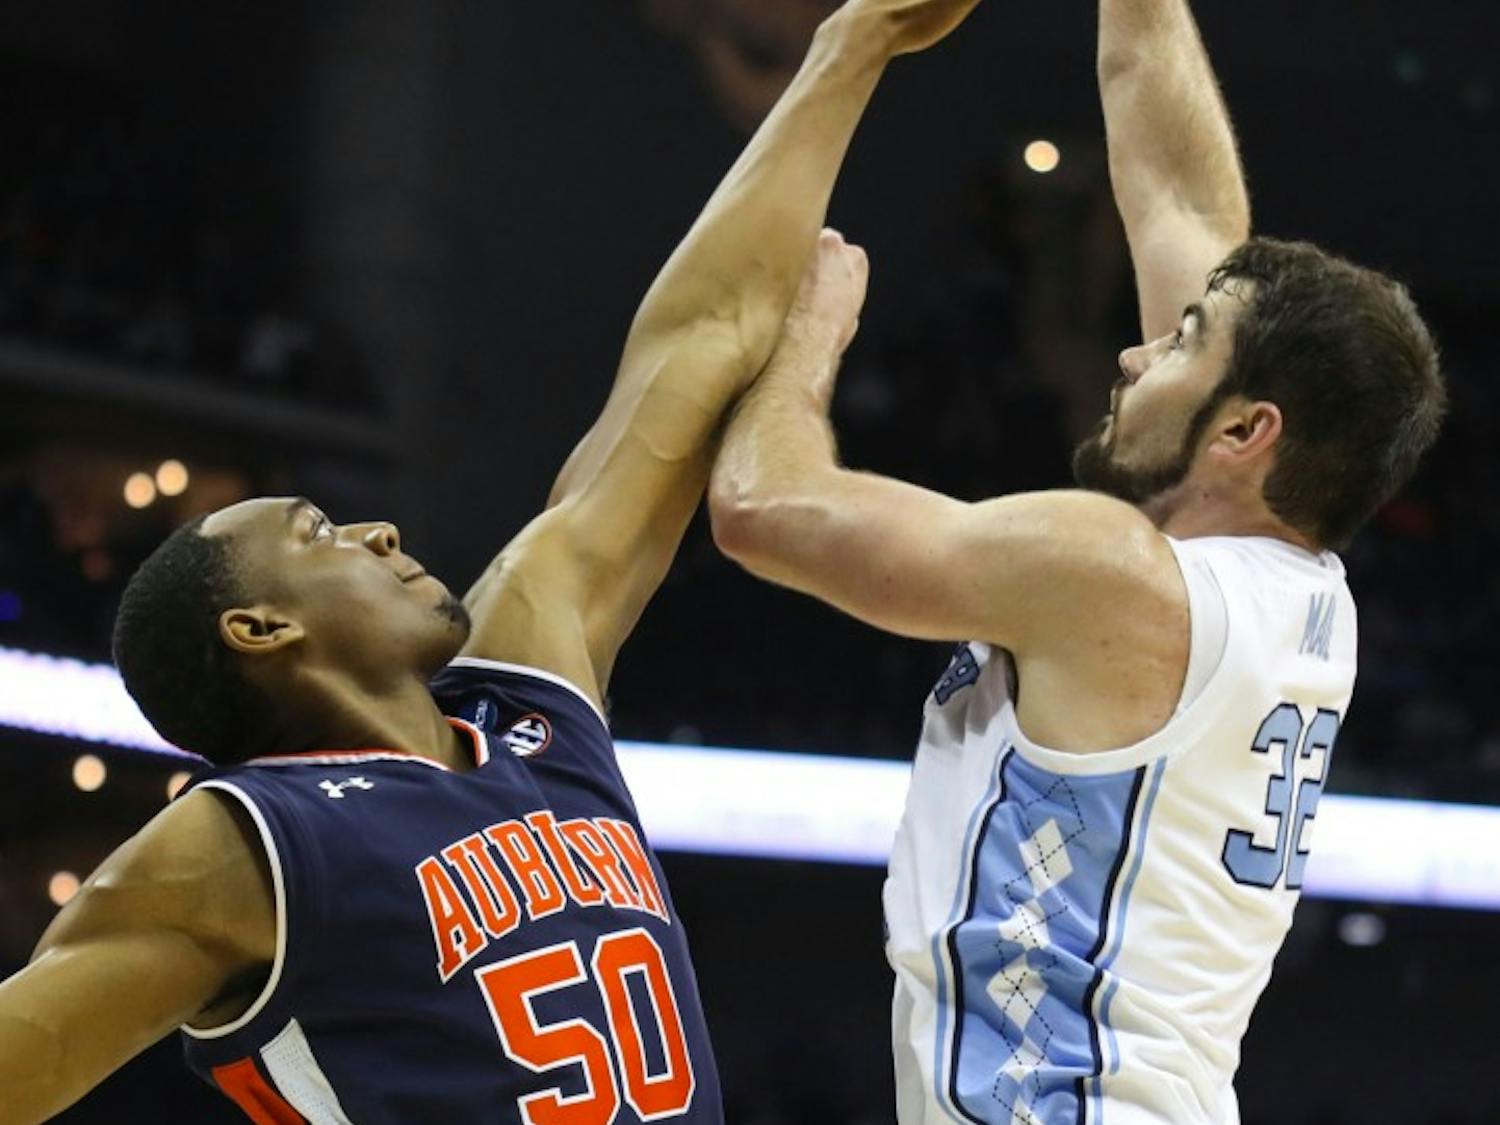 Auburn junior center Austin Wiley (50) guards UNC senior forward Luke Maye (32) during UNC's 97-80 loss against Auburn in the Sweet 16 of the NCAA Tournament on Friday, March 29, 2019 at the Sprint Center in Kansas City, M.O.